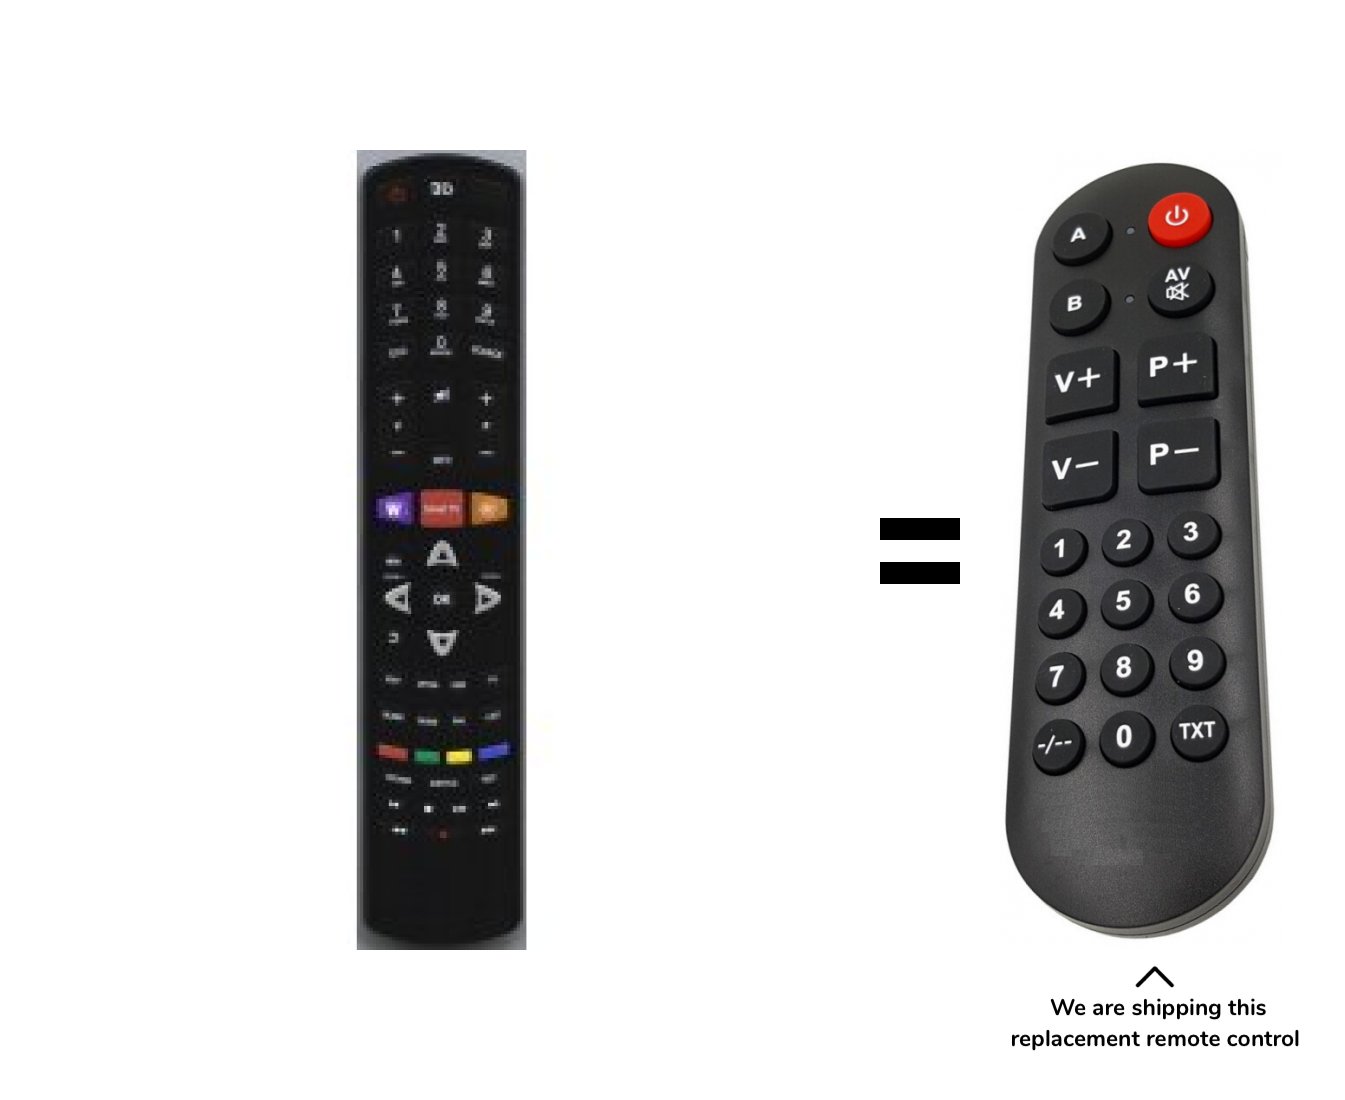 TCL RC310 remote control for seniors for 3D TV